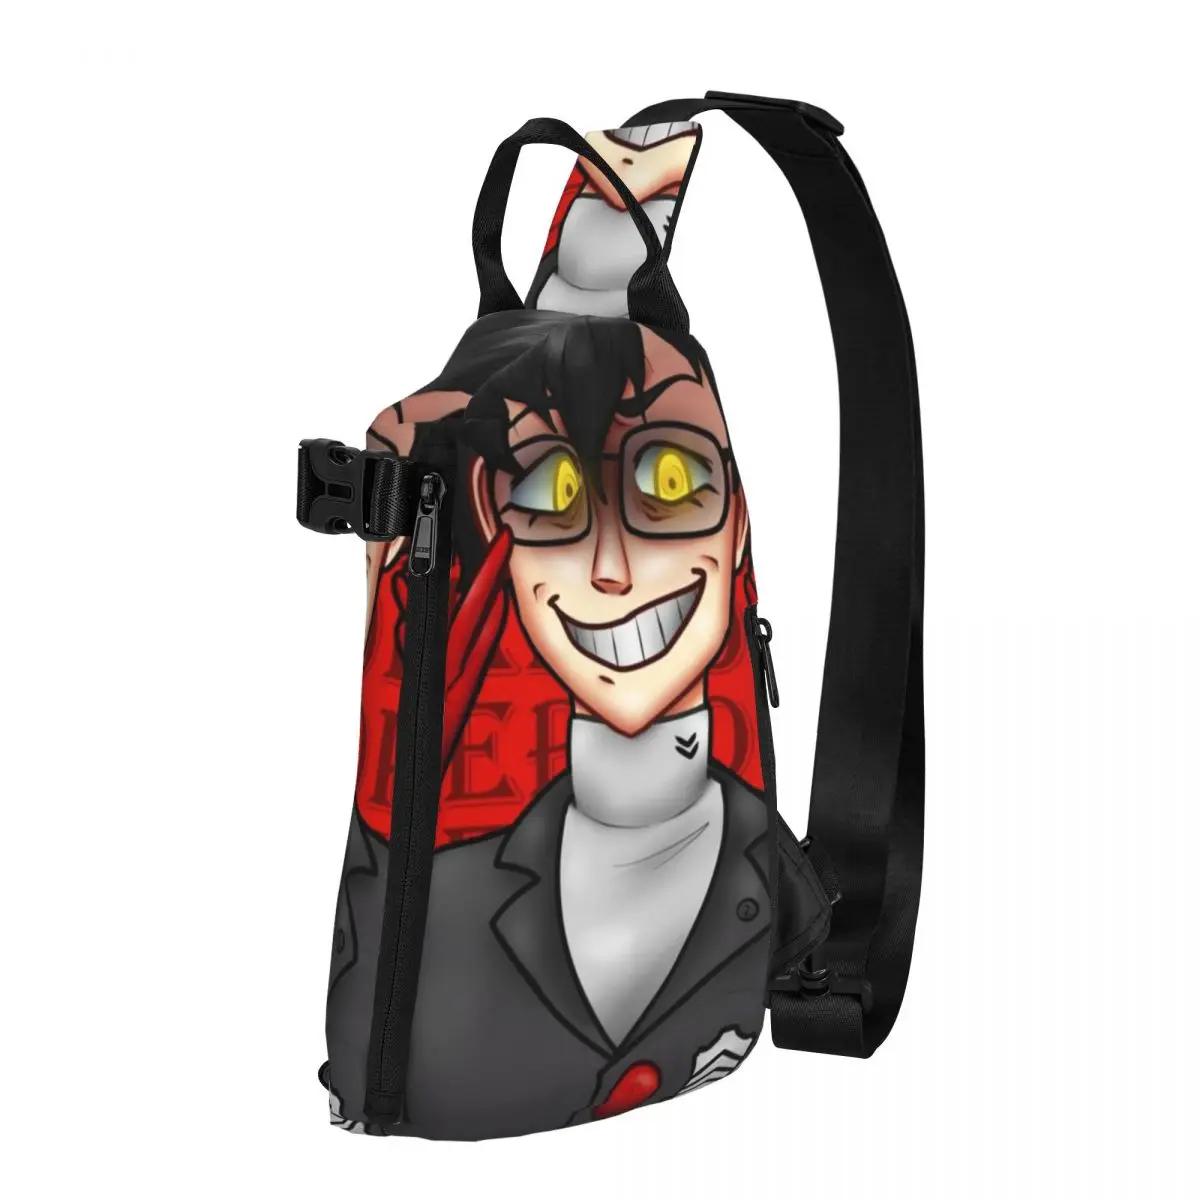 

Persona 5 Shoulder Bags videogame morgana Fishing Chest Bag Male Travel Graphic Design Sling Bag Casual University Small Bags